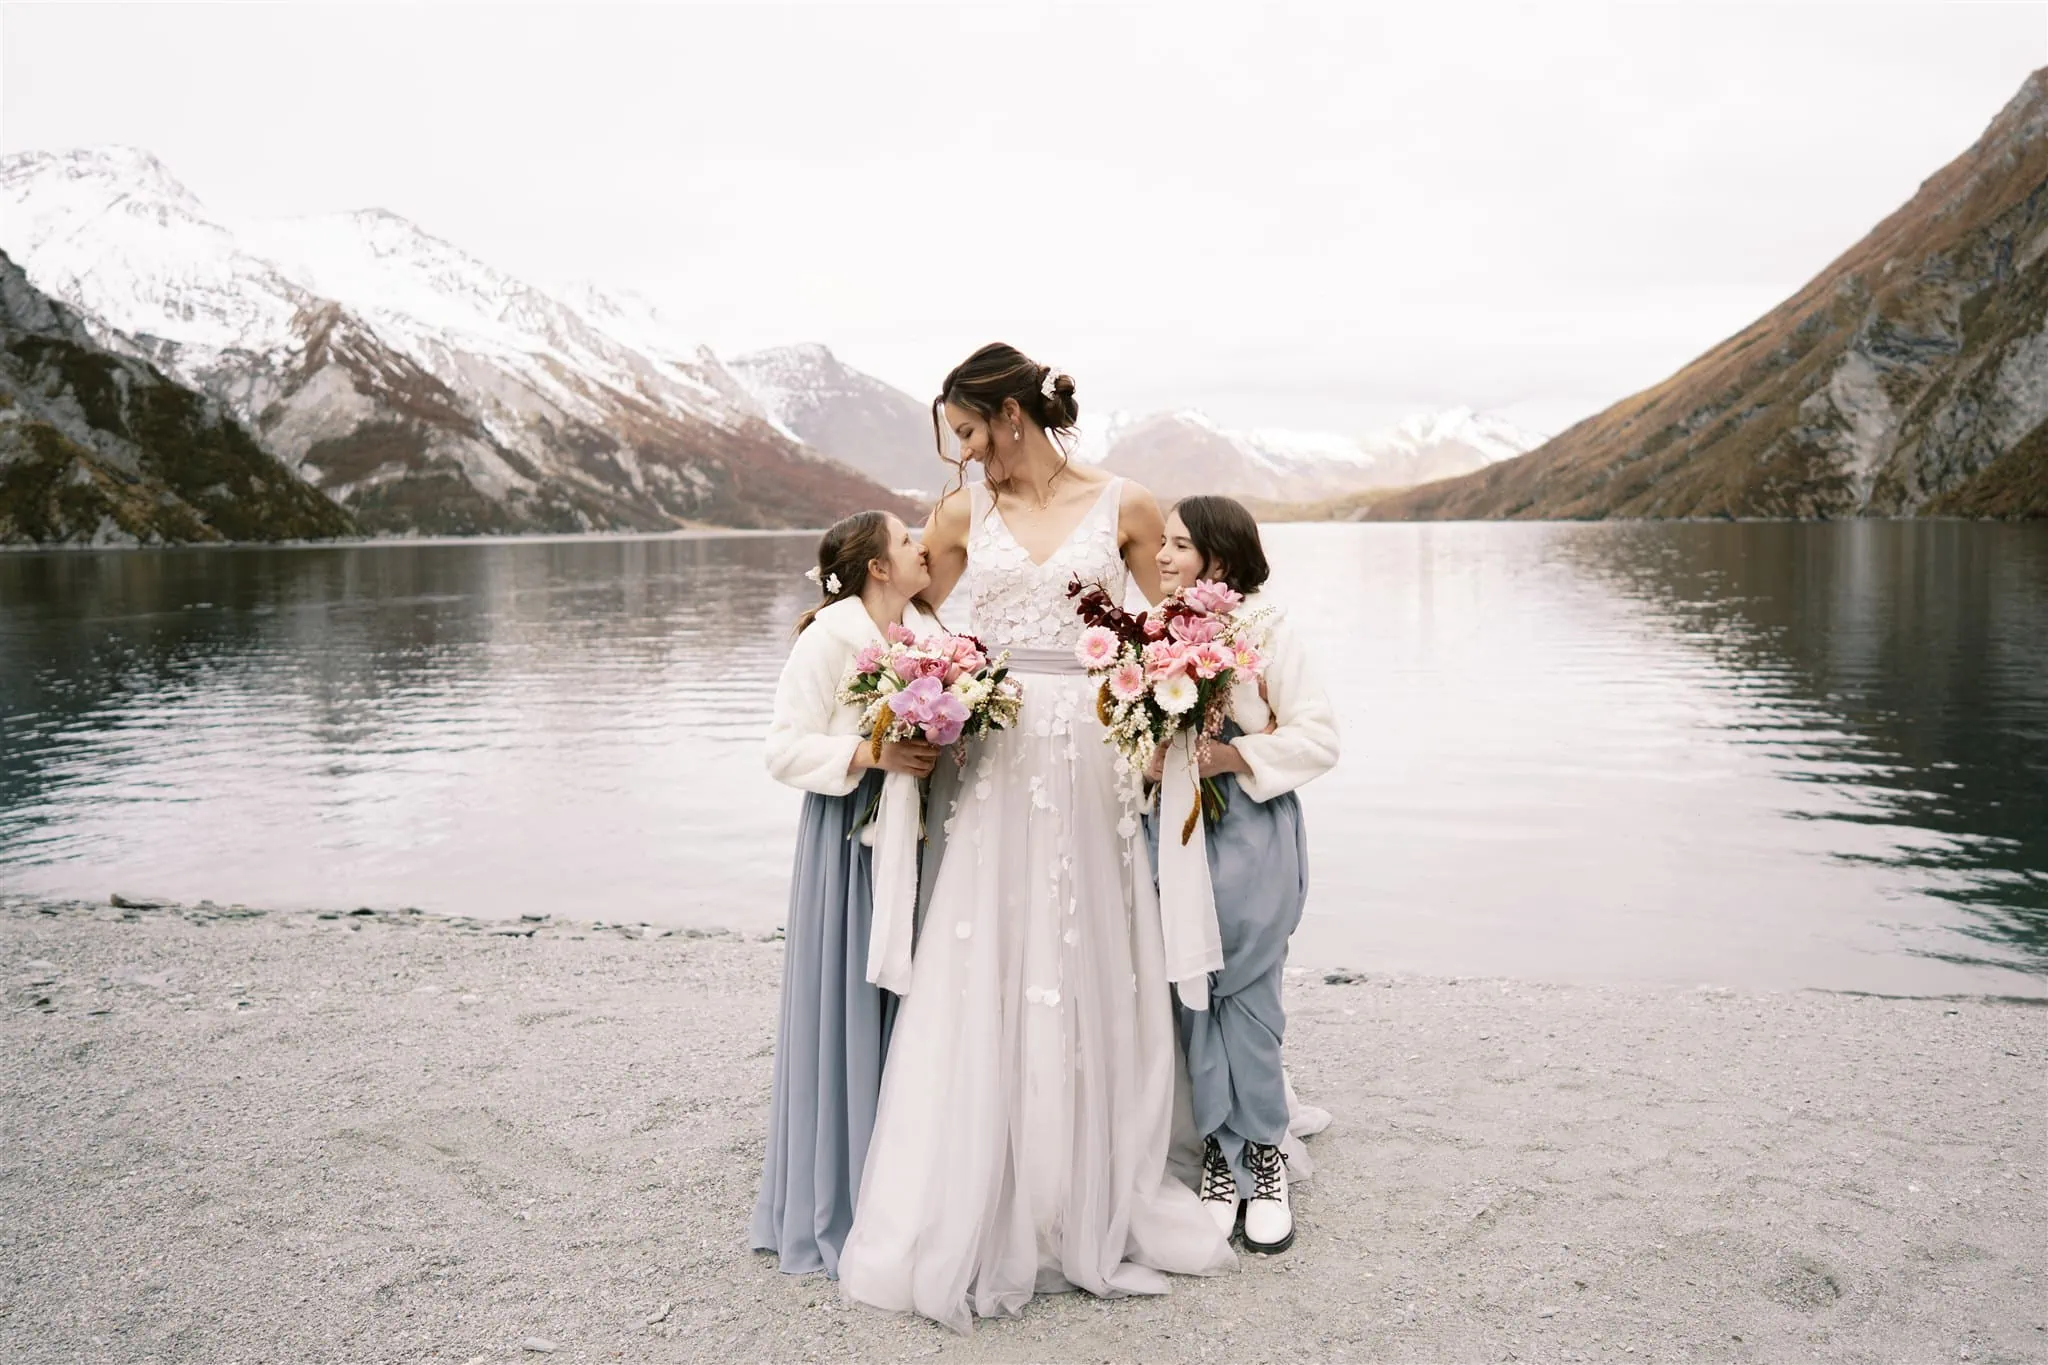 Queenstown New Zealand Elopement Wedding Photographer - Alex & Shahar, an adventurous couple from Queenstown, chose a breathtaking location for their elopement. With the serene lake shimmering in the foreground and majestic mountains towering in the background